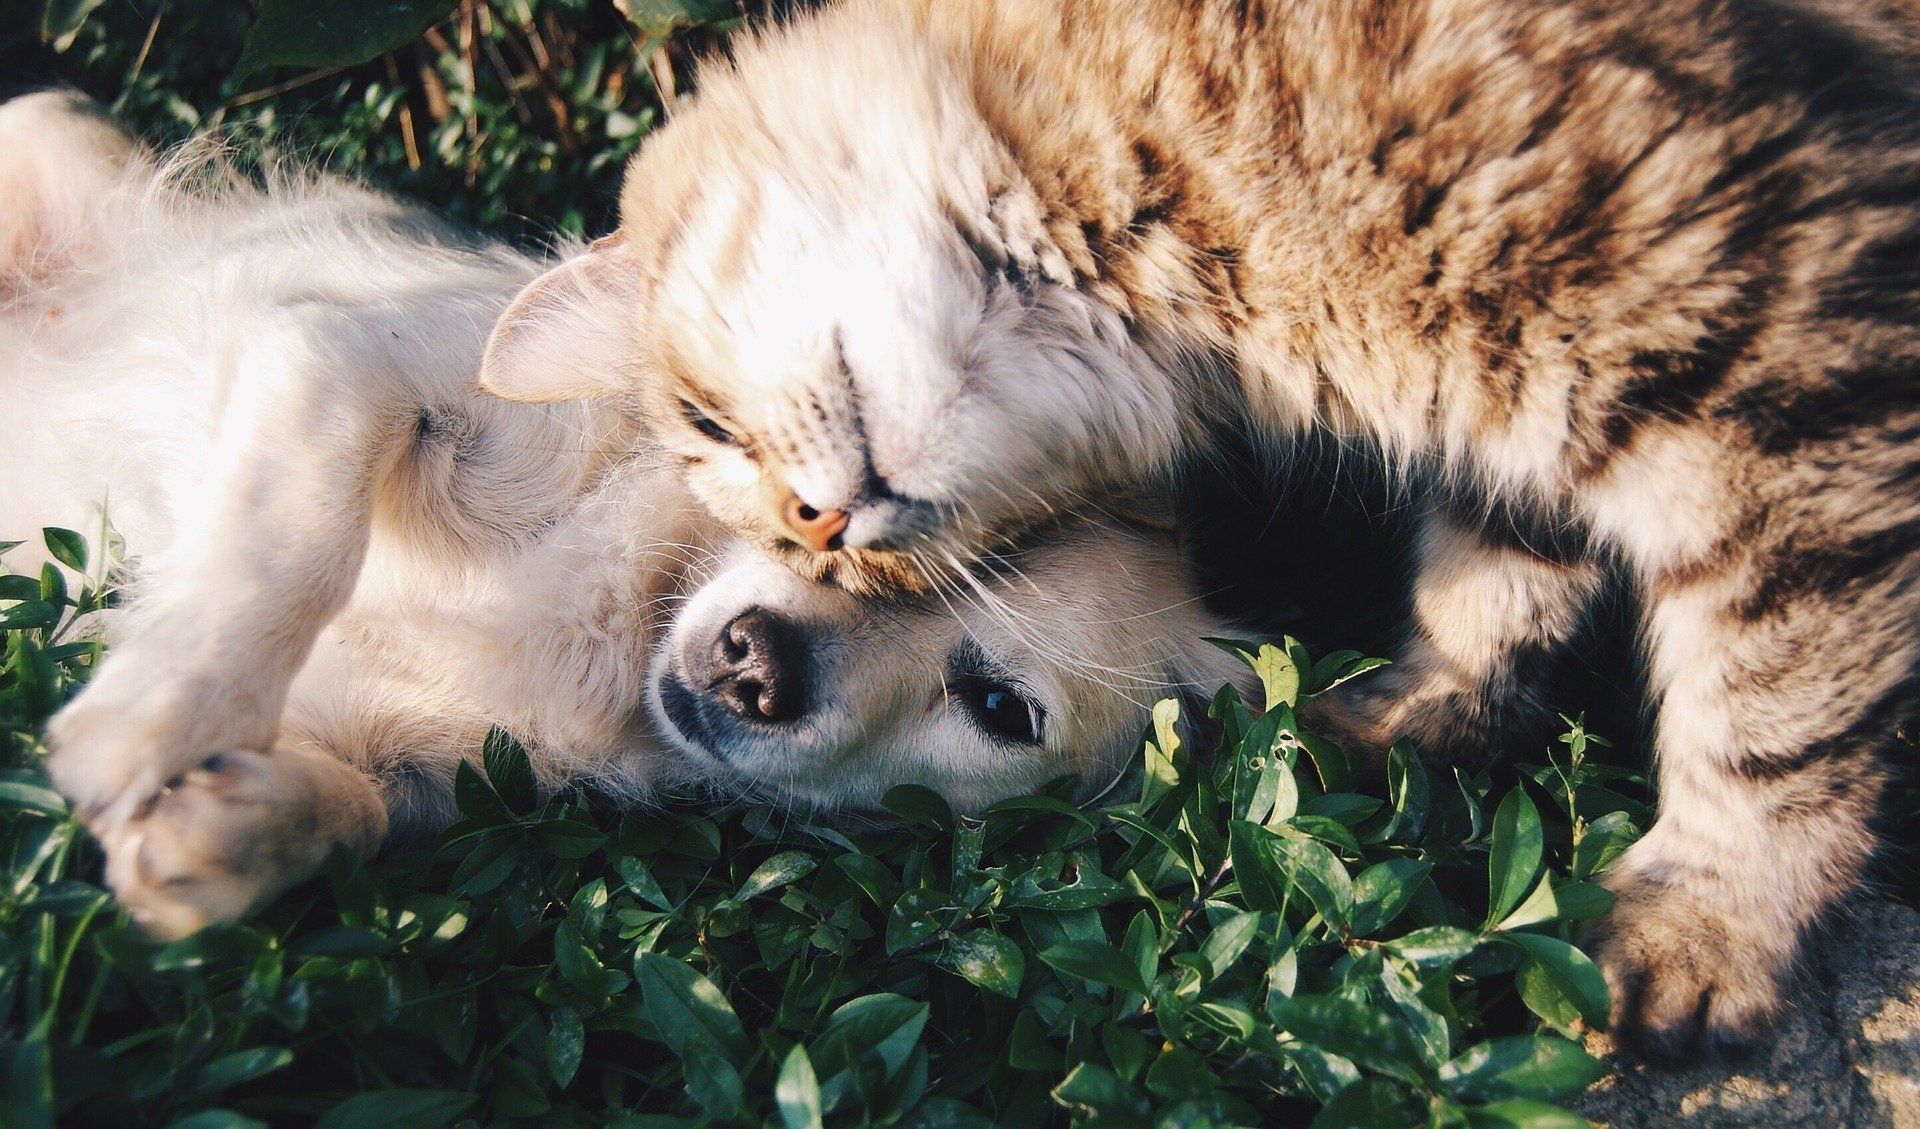 What is the history behind your pets’ most annoying habits?